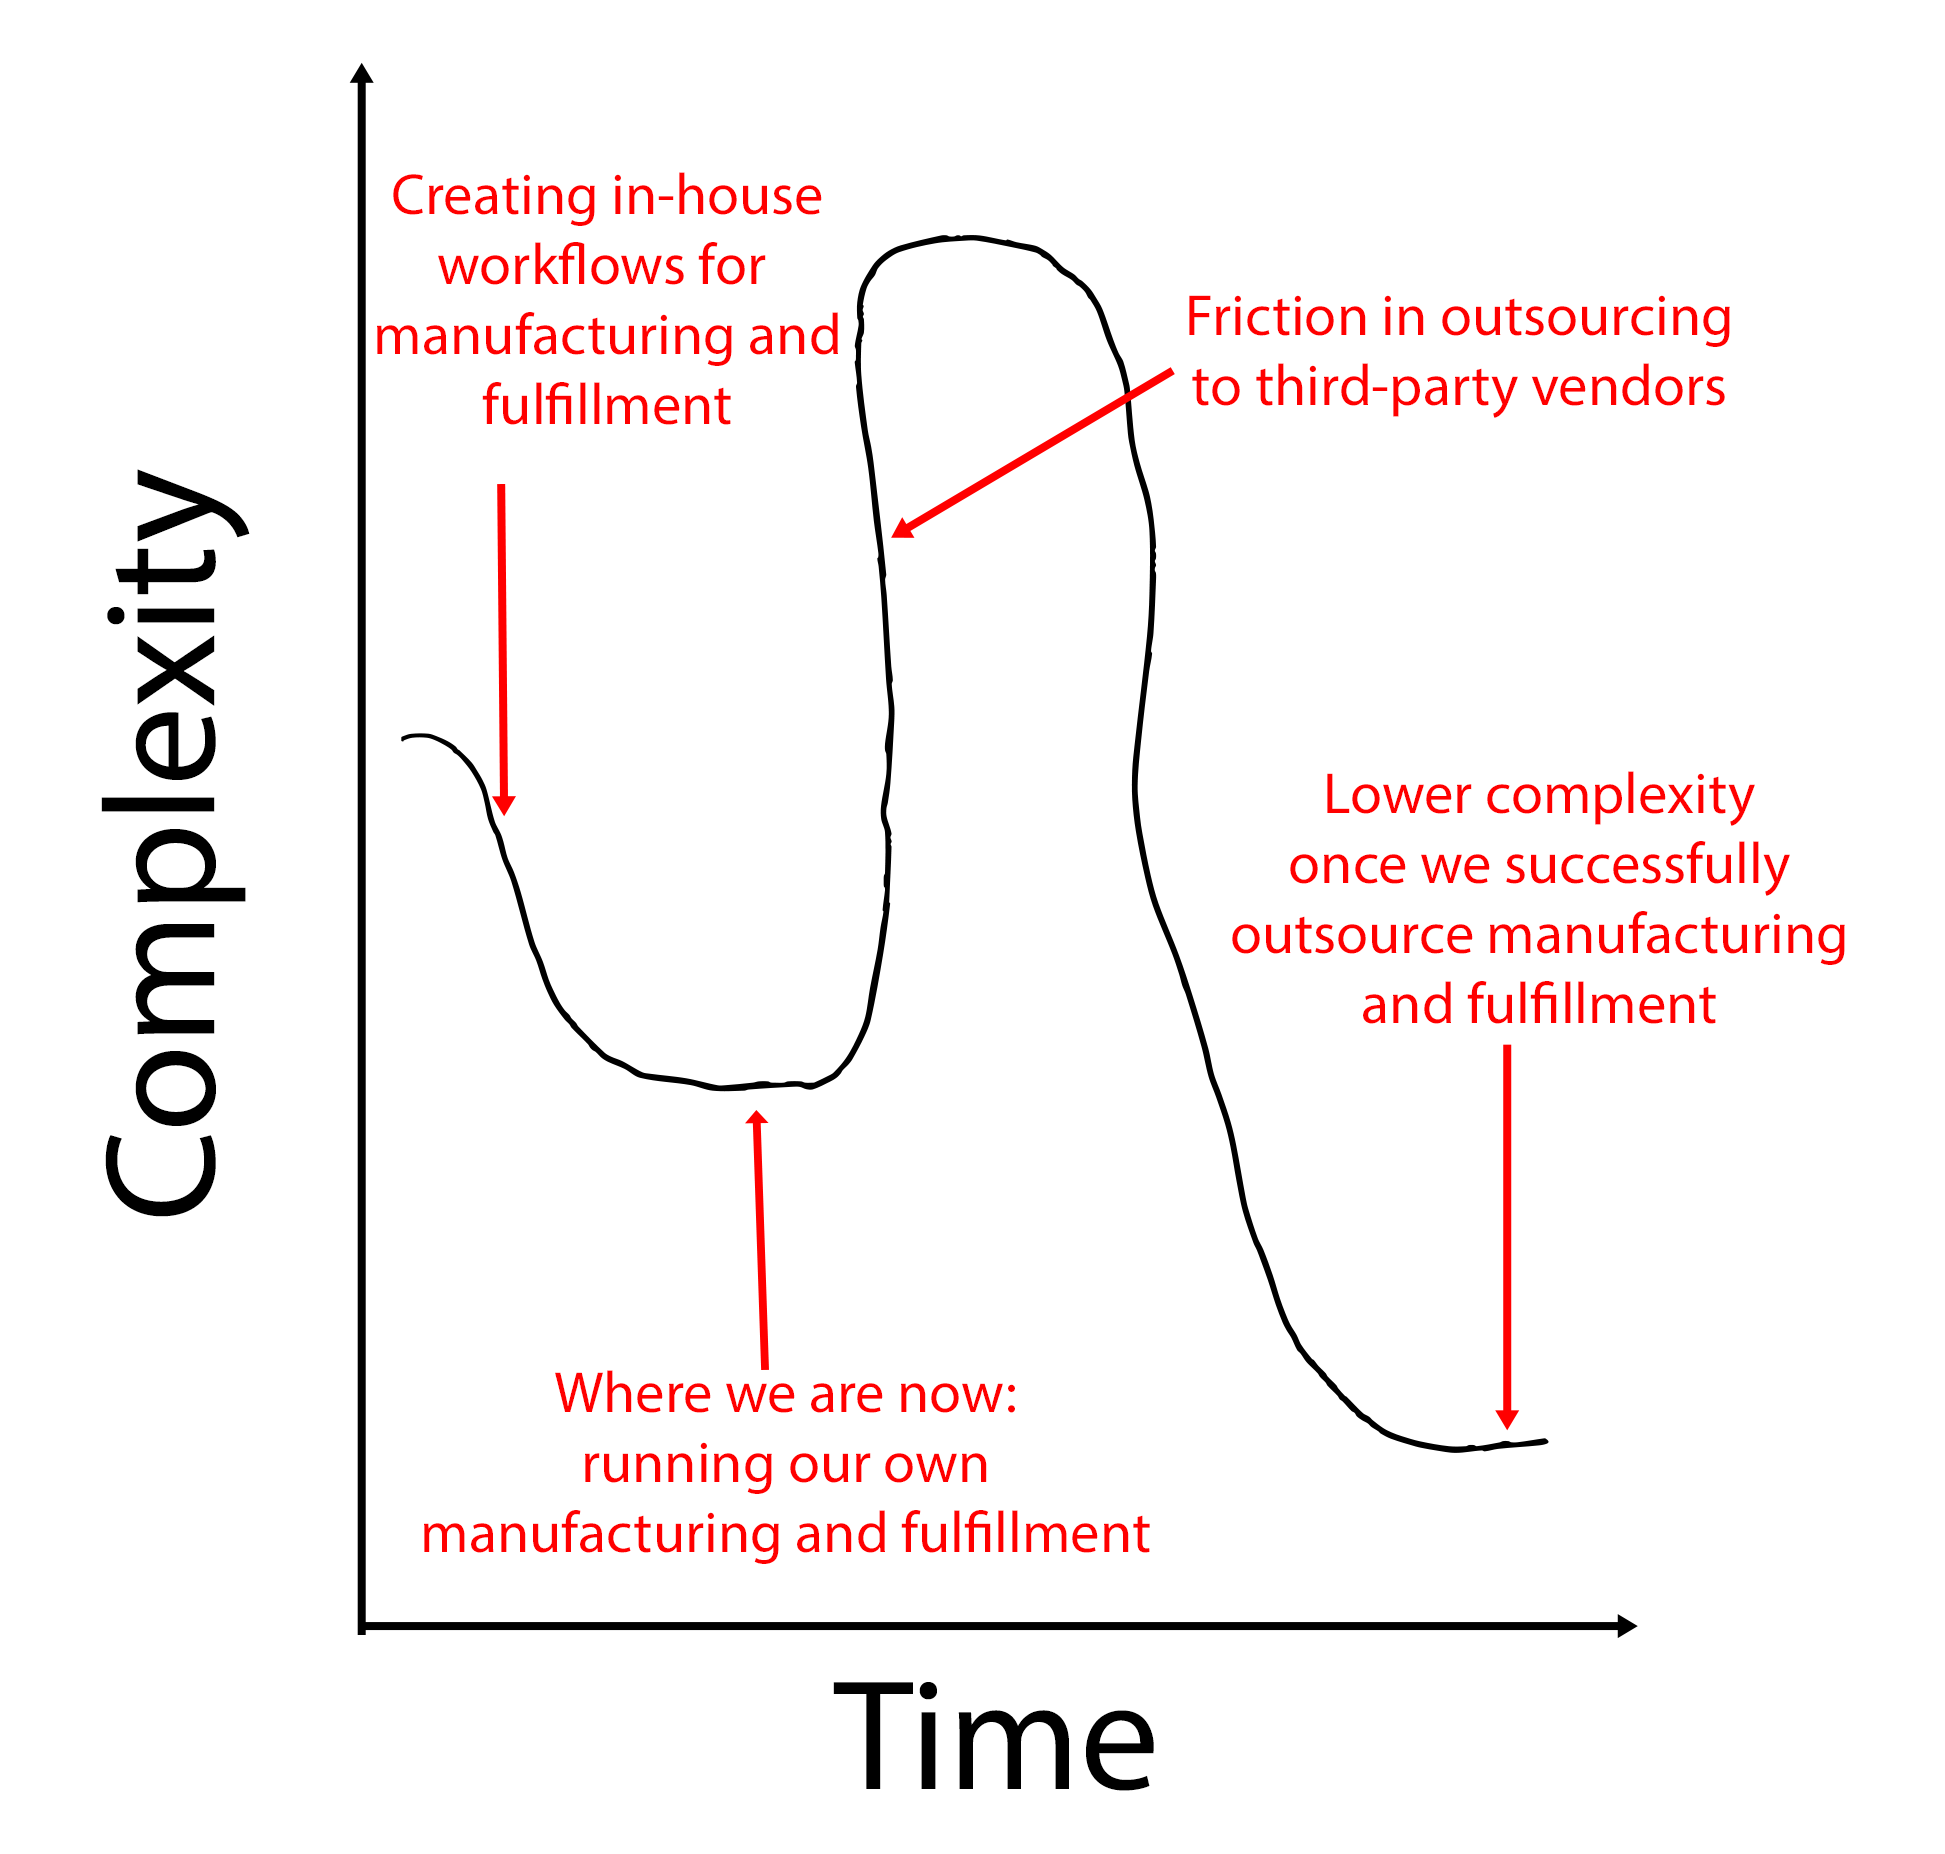 Graph showing complexity going down as we smooth out our processes, then increasing drastically as we outsource, then reducing to below our current state once outsourcing has smoothed out.